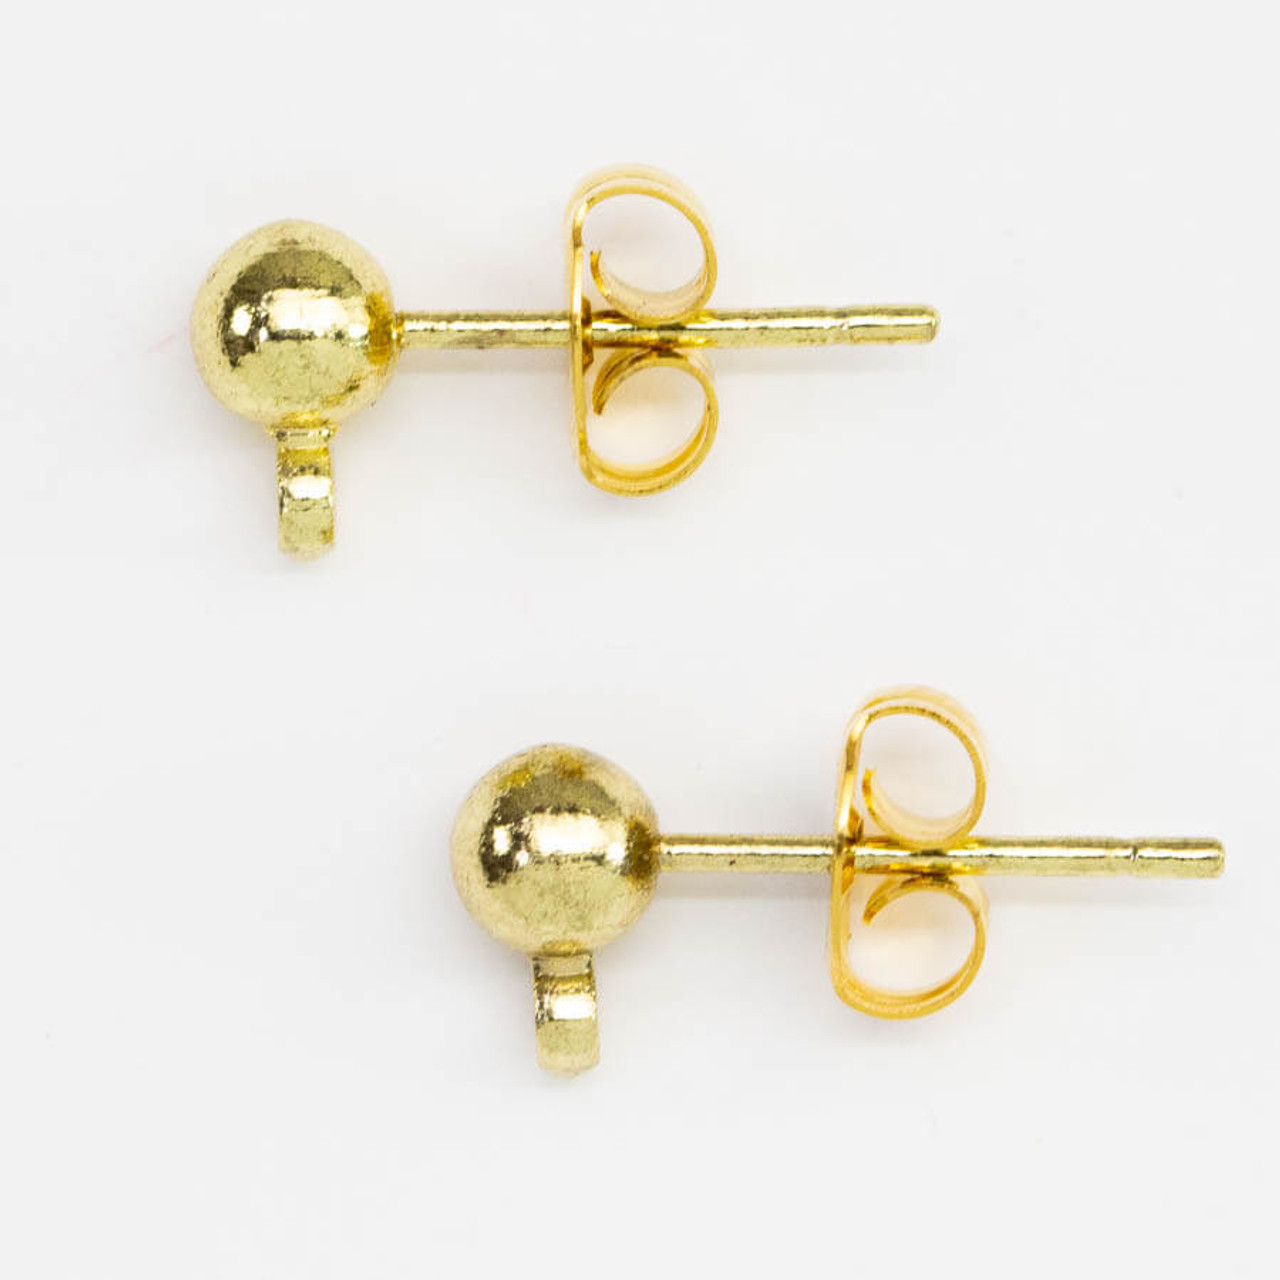 Gold Ball Earring Posts Connectors, Round Shape Earring Posts With  Connector Hole, Gold Plated Jewelry Making Earring Supplies Findings 